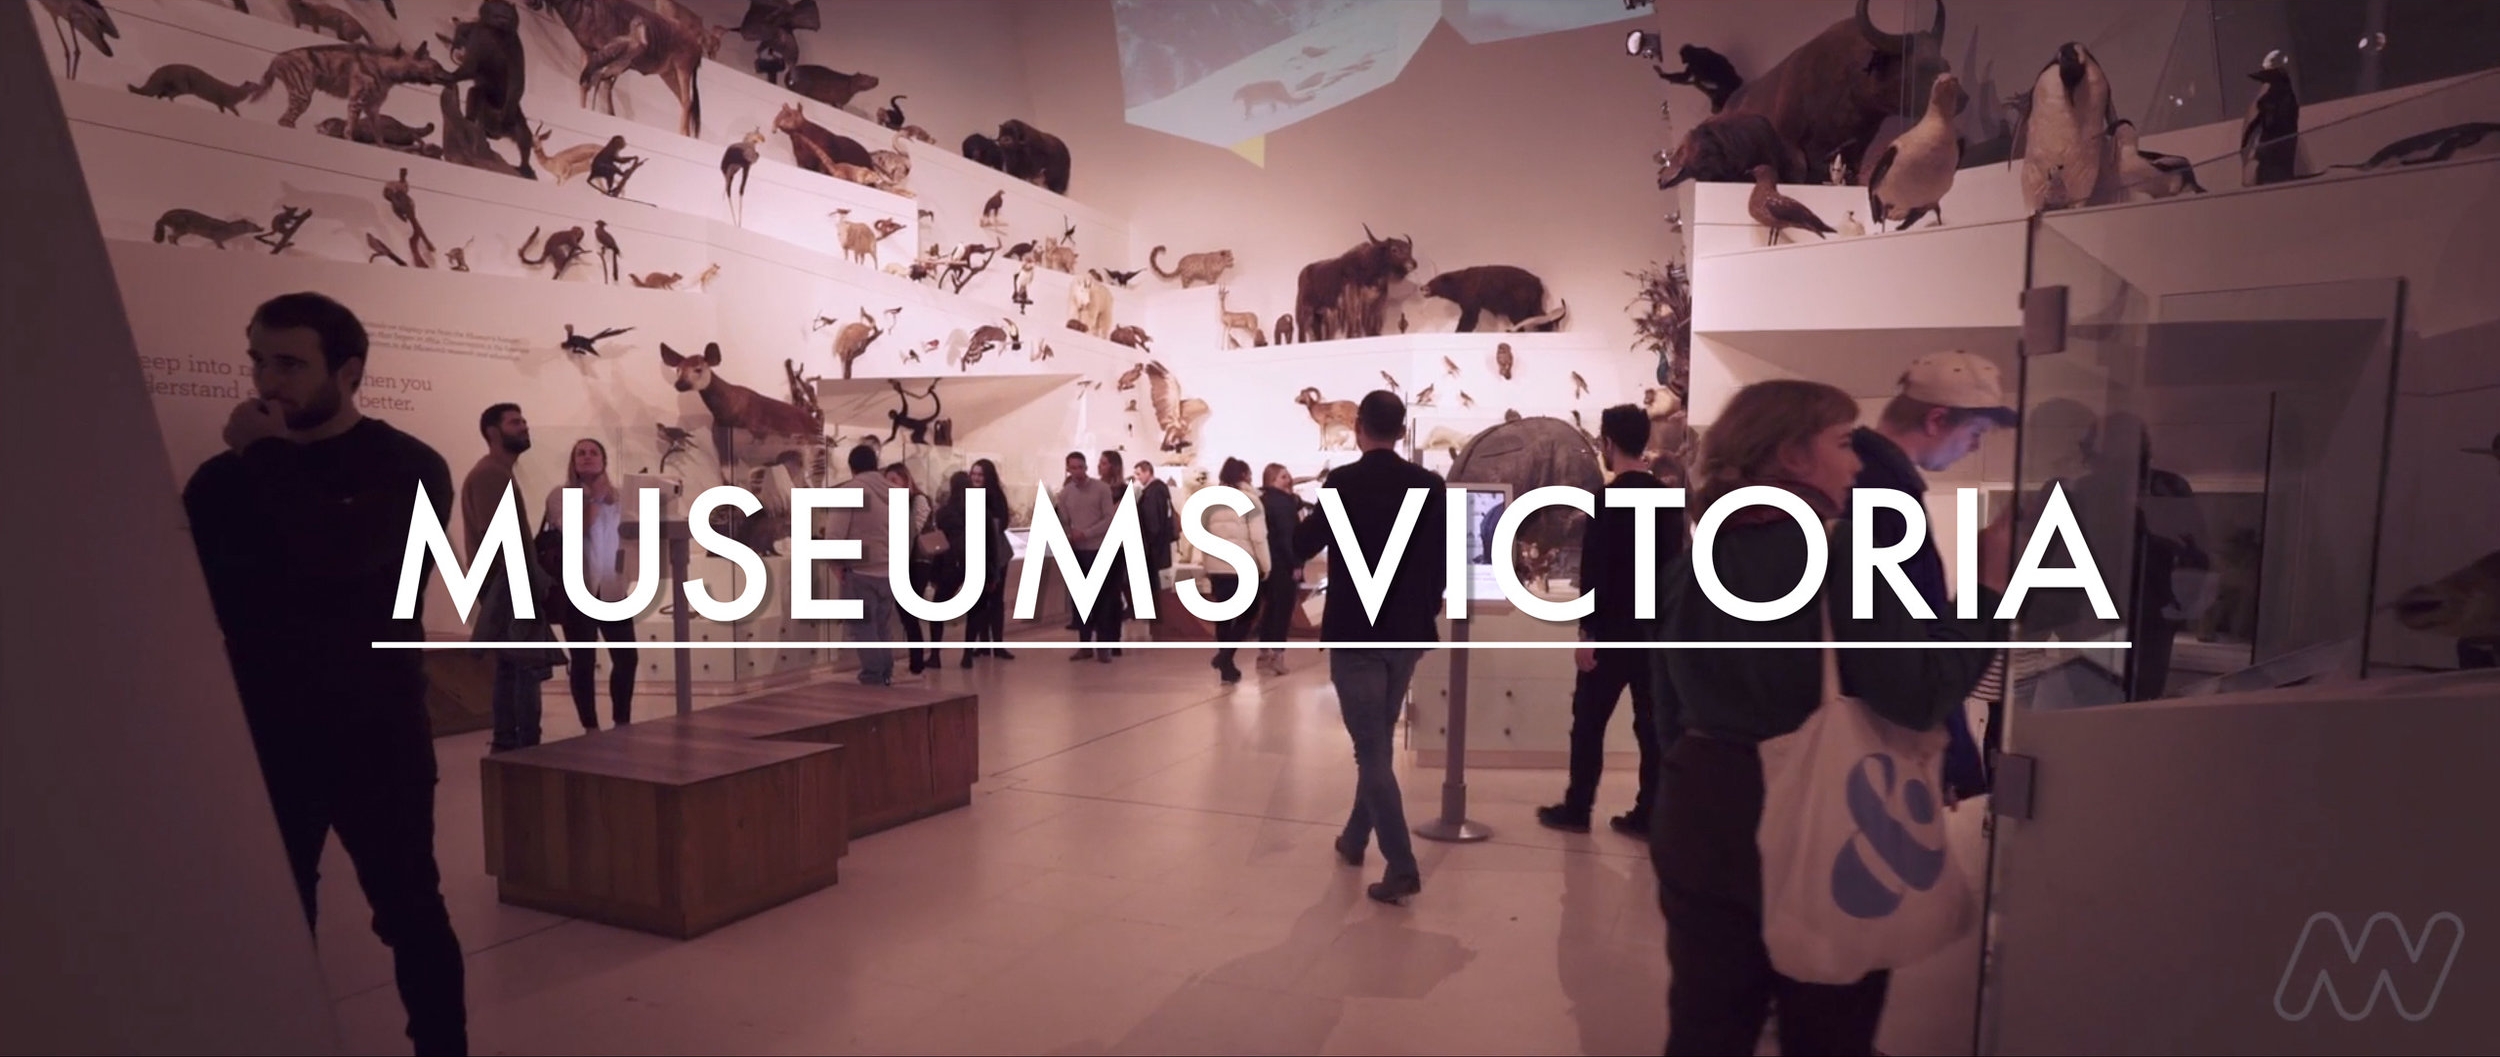 feature-museums-victoria.jpg